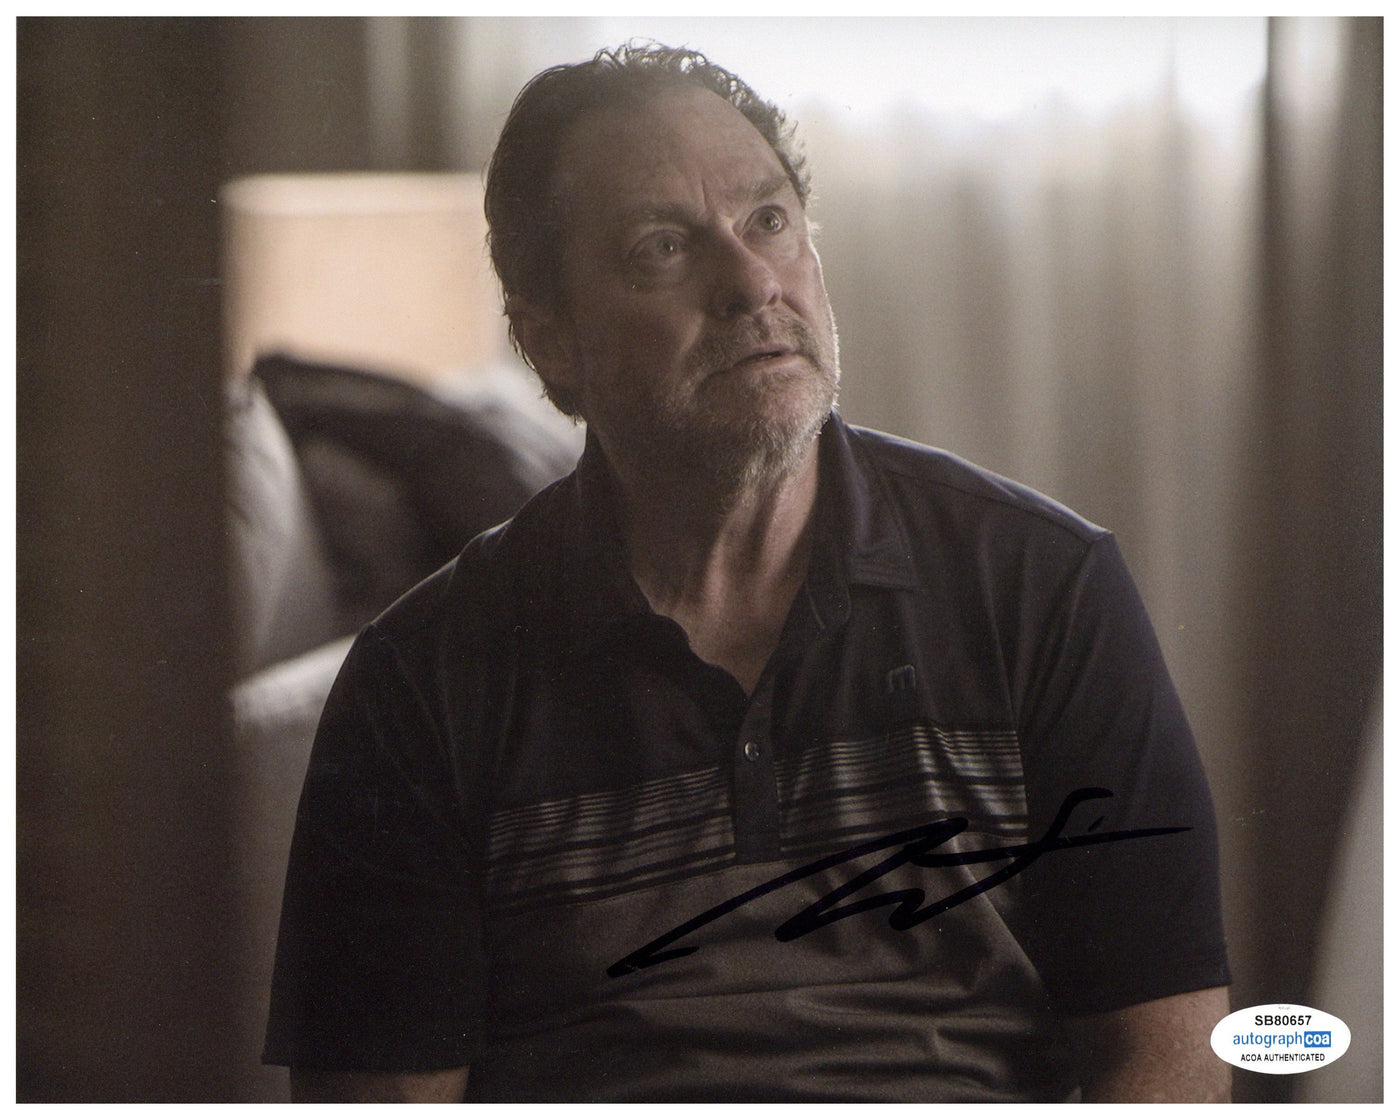 STEPHEN ROOT SIGNED 8X10 PHOTO BARRY AUTOGRAPHED ACOA